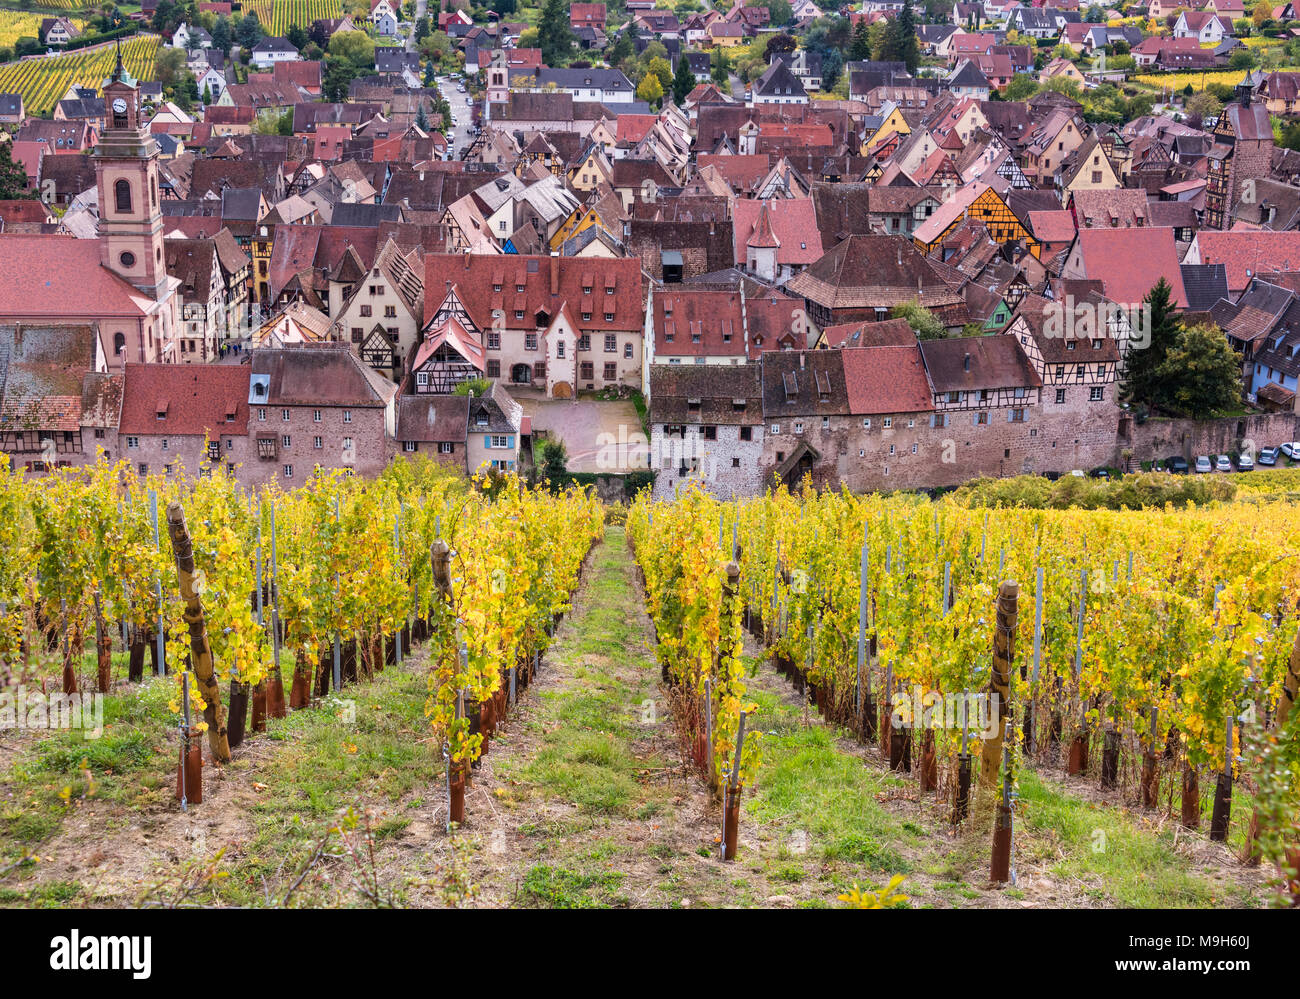 A view towards vineyards and the medieval town of Riquewihr, Alsatian Wine Route, France Stock Photo